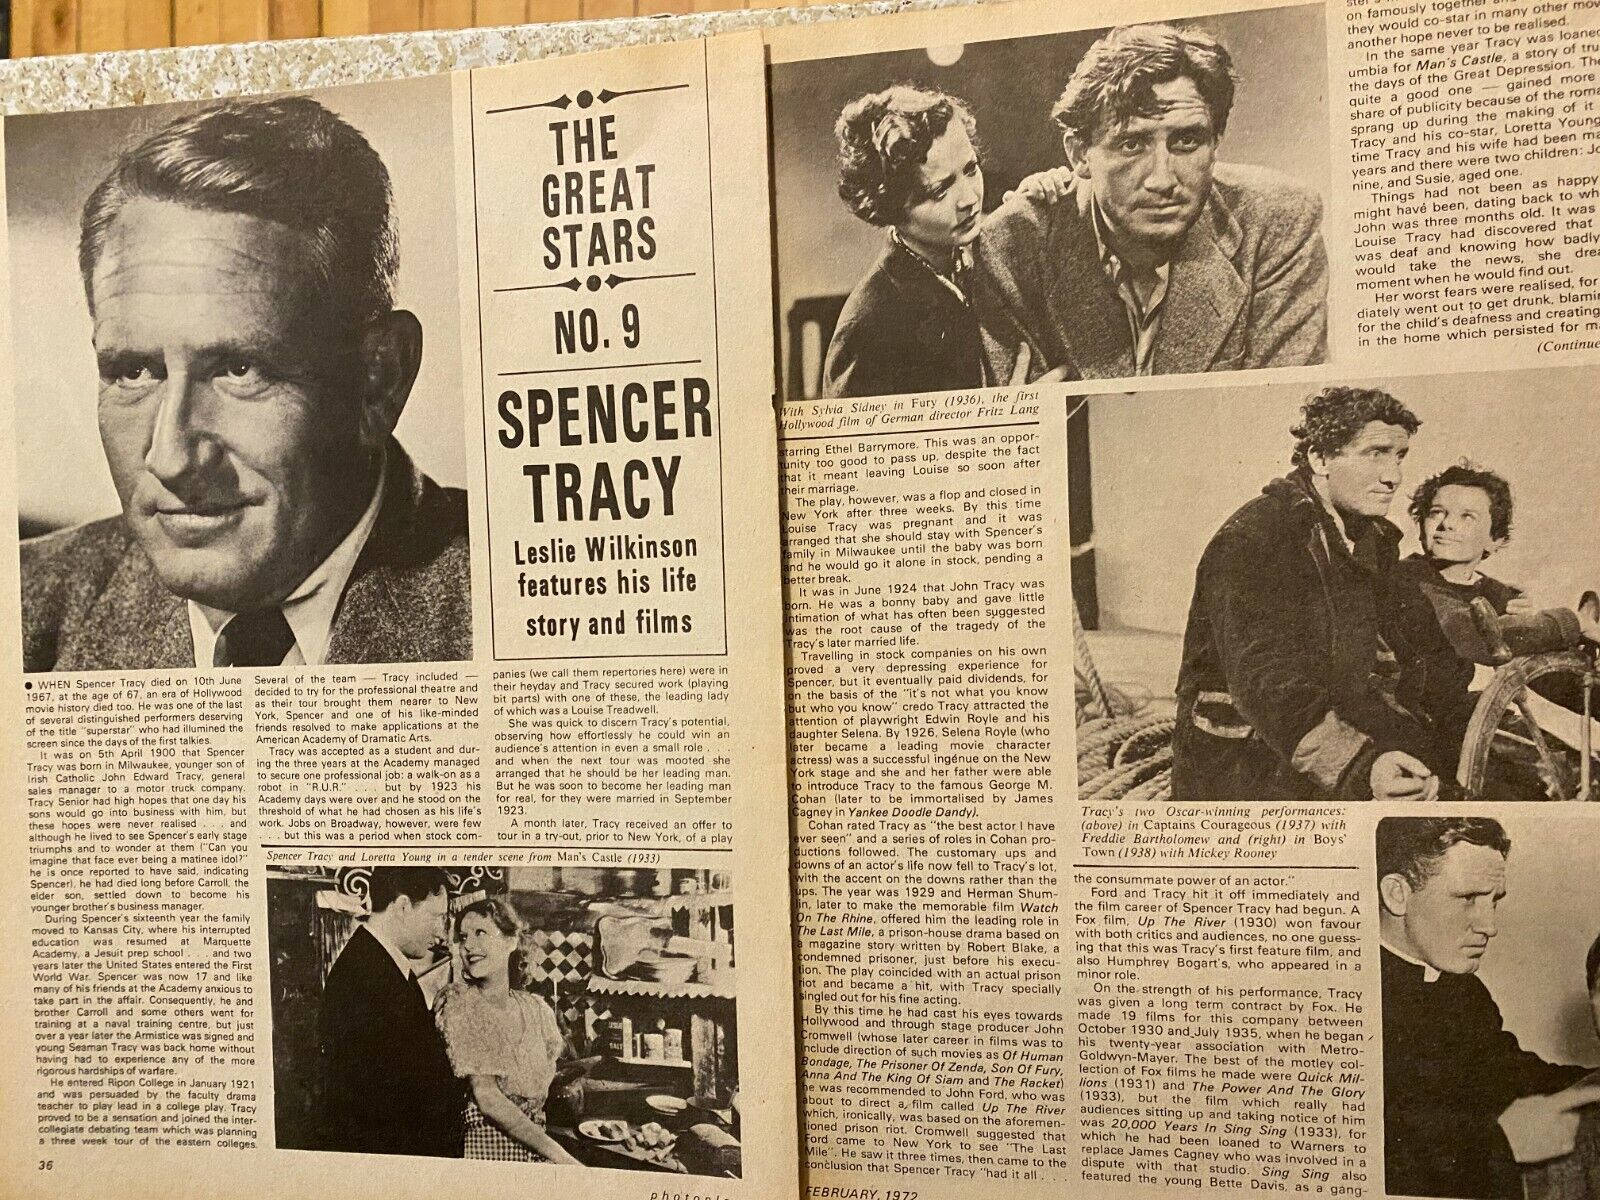 Spencer Tracy The Great Stars No. 9 Tapet Wallpaper